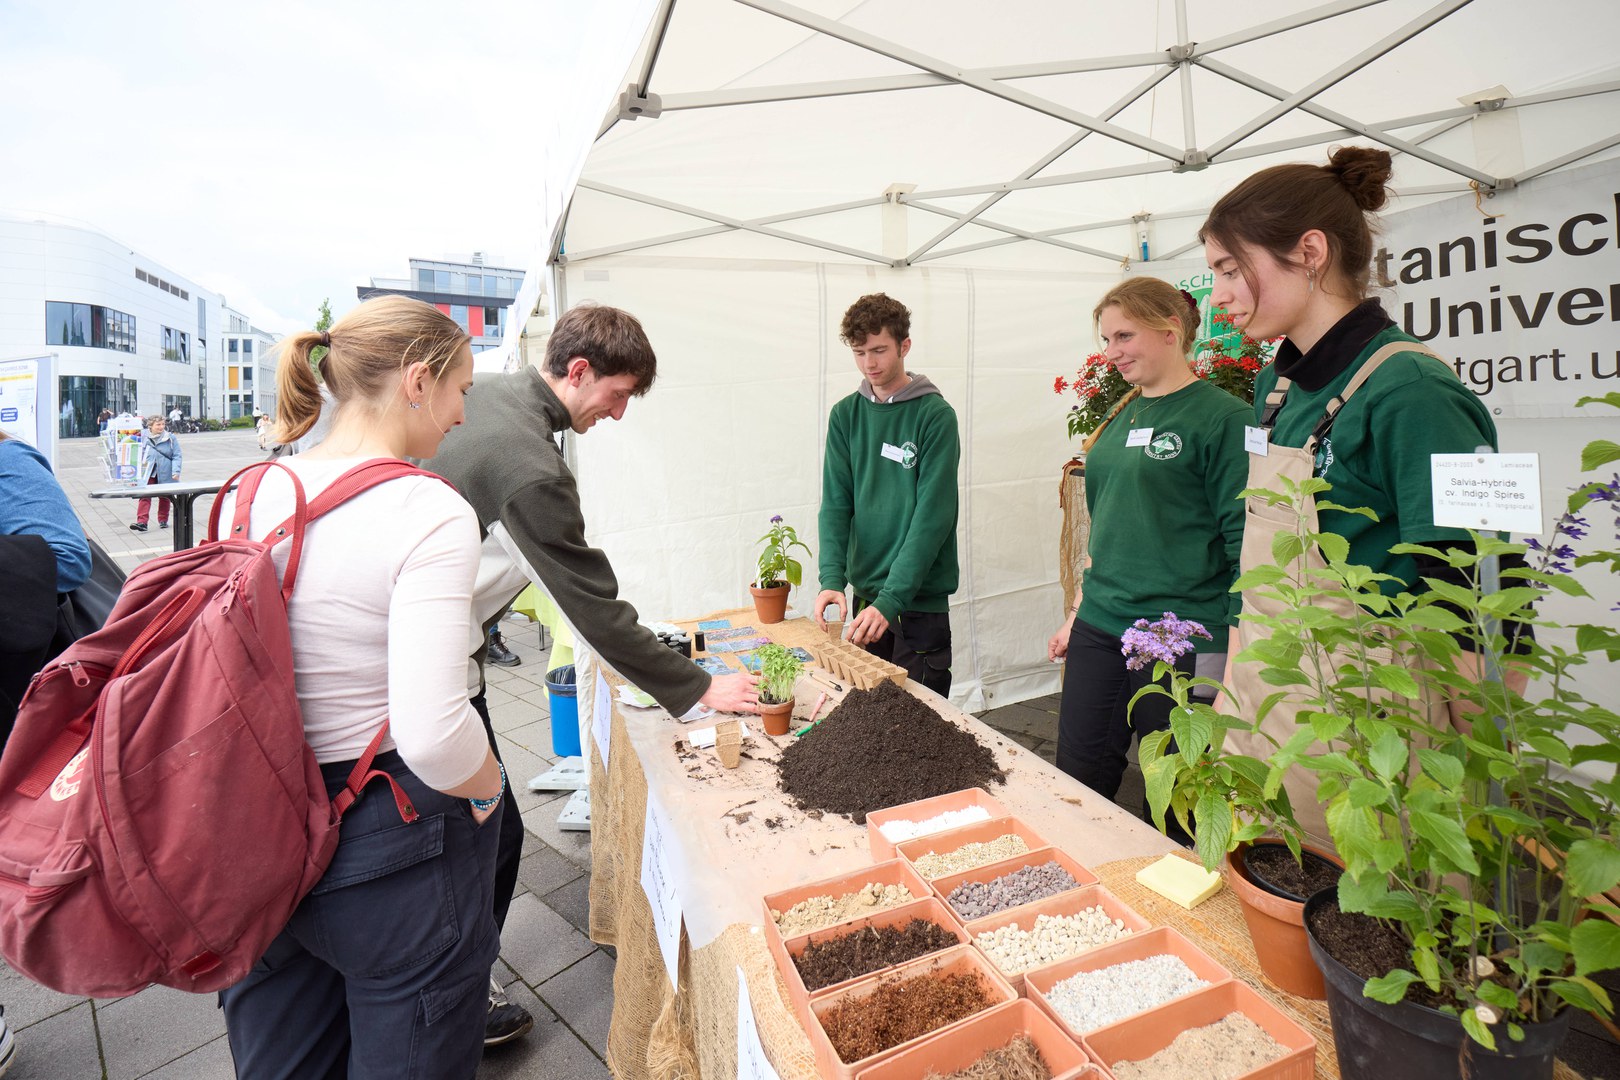 Visitors to the Botanic Garden’s stall were able to pick seedlings and take them home